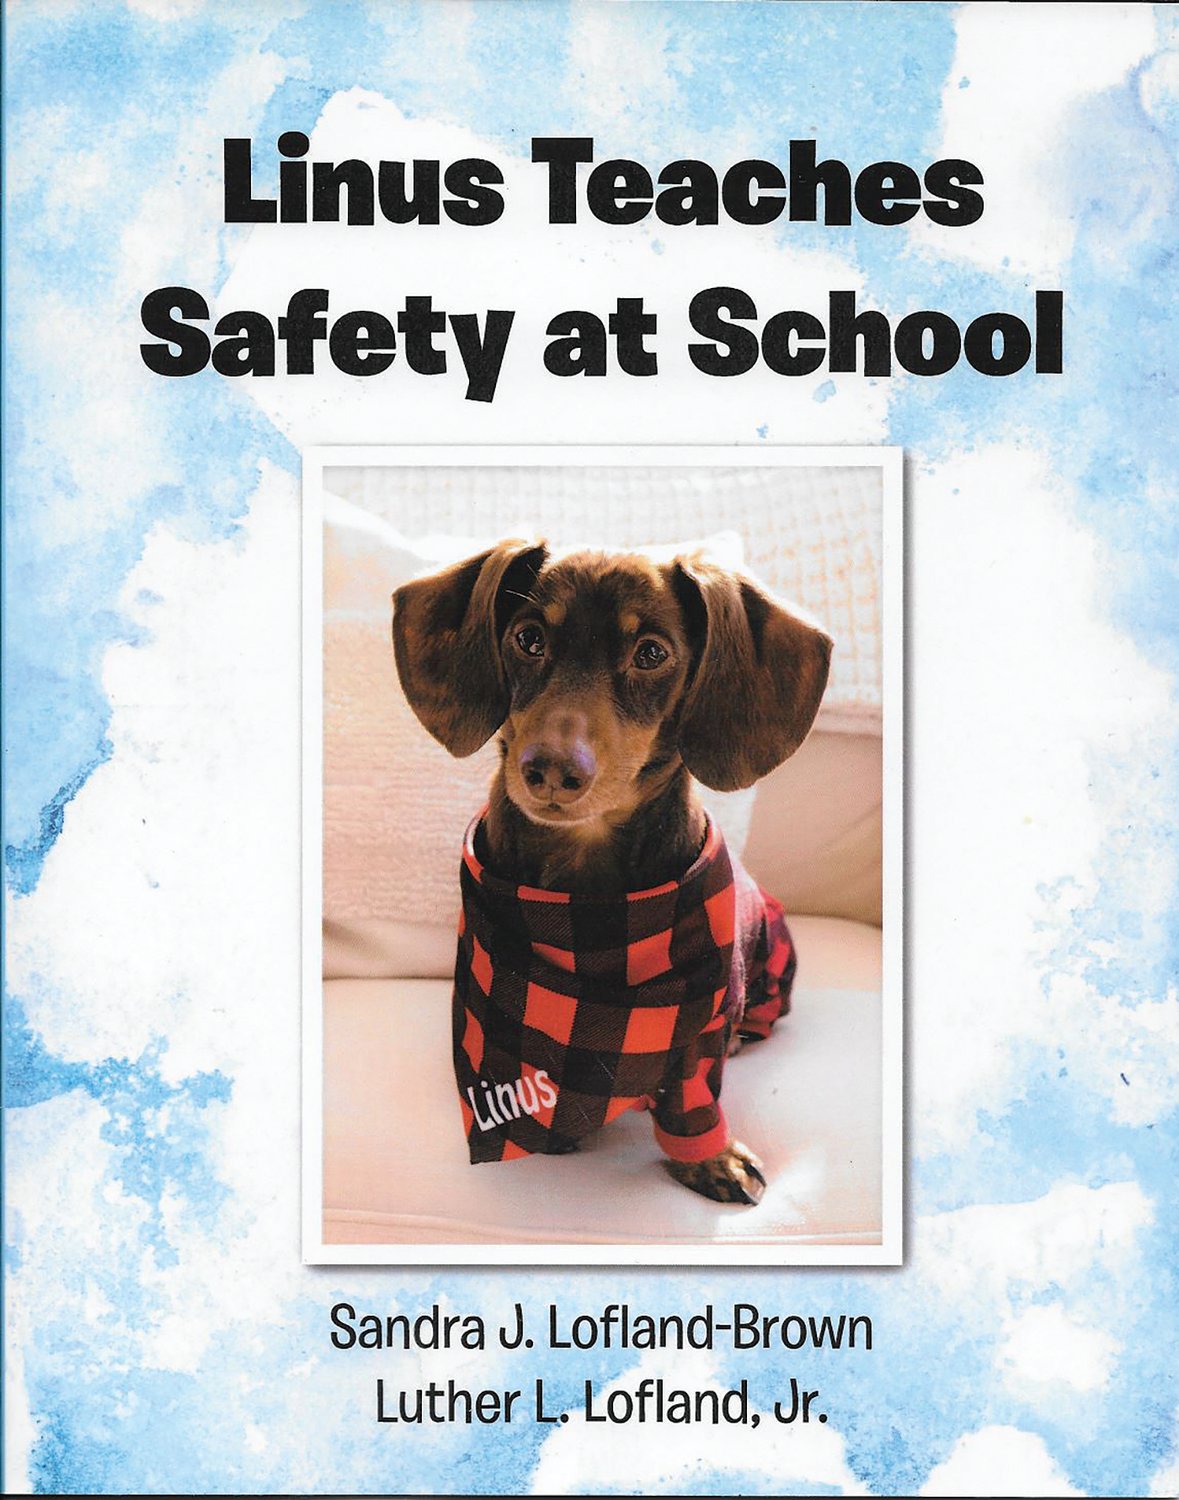 Sandra J. Lofland-Brown and her son, Luther L. Lofland Jr., have co-authored the book "Linus Teaches Safety at School" to educate children about the rules for personal safety.